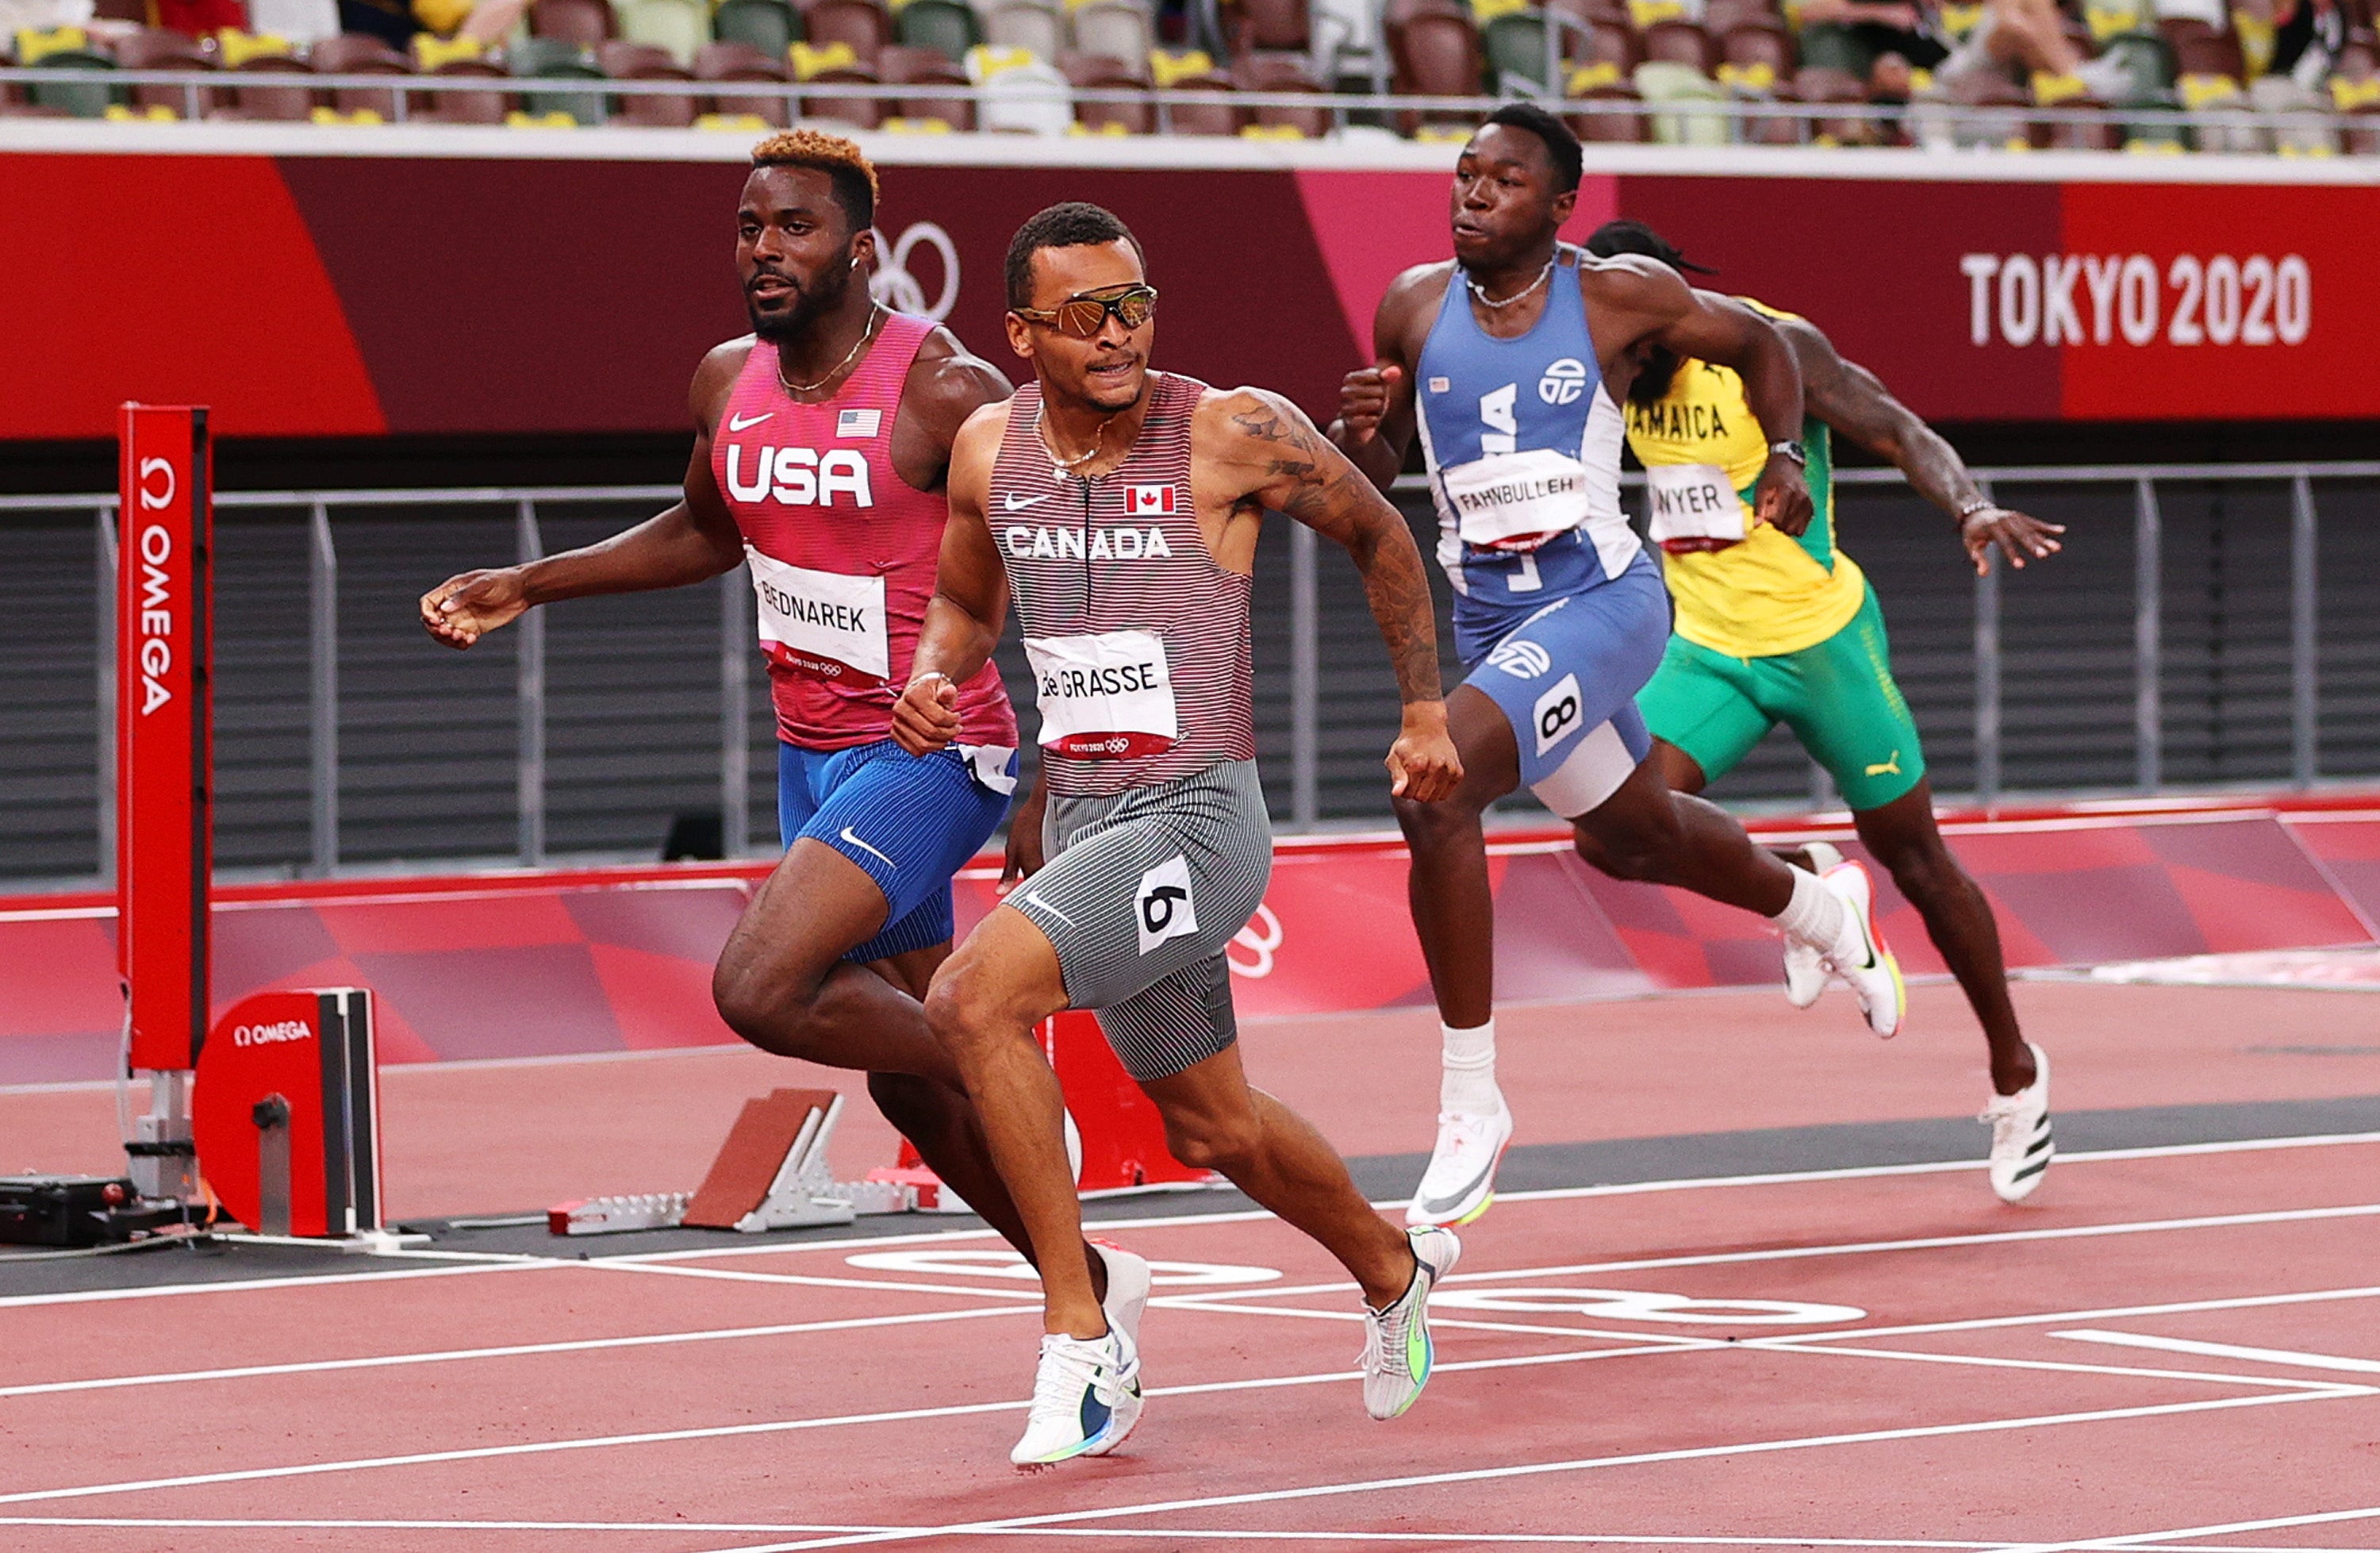 Andre de Grasse of Team Canada finishes ahead of Kenneth Bednarek of Team United States